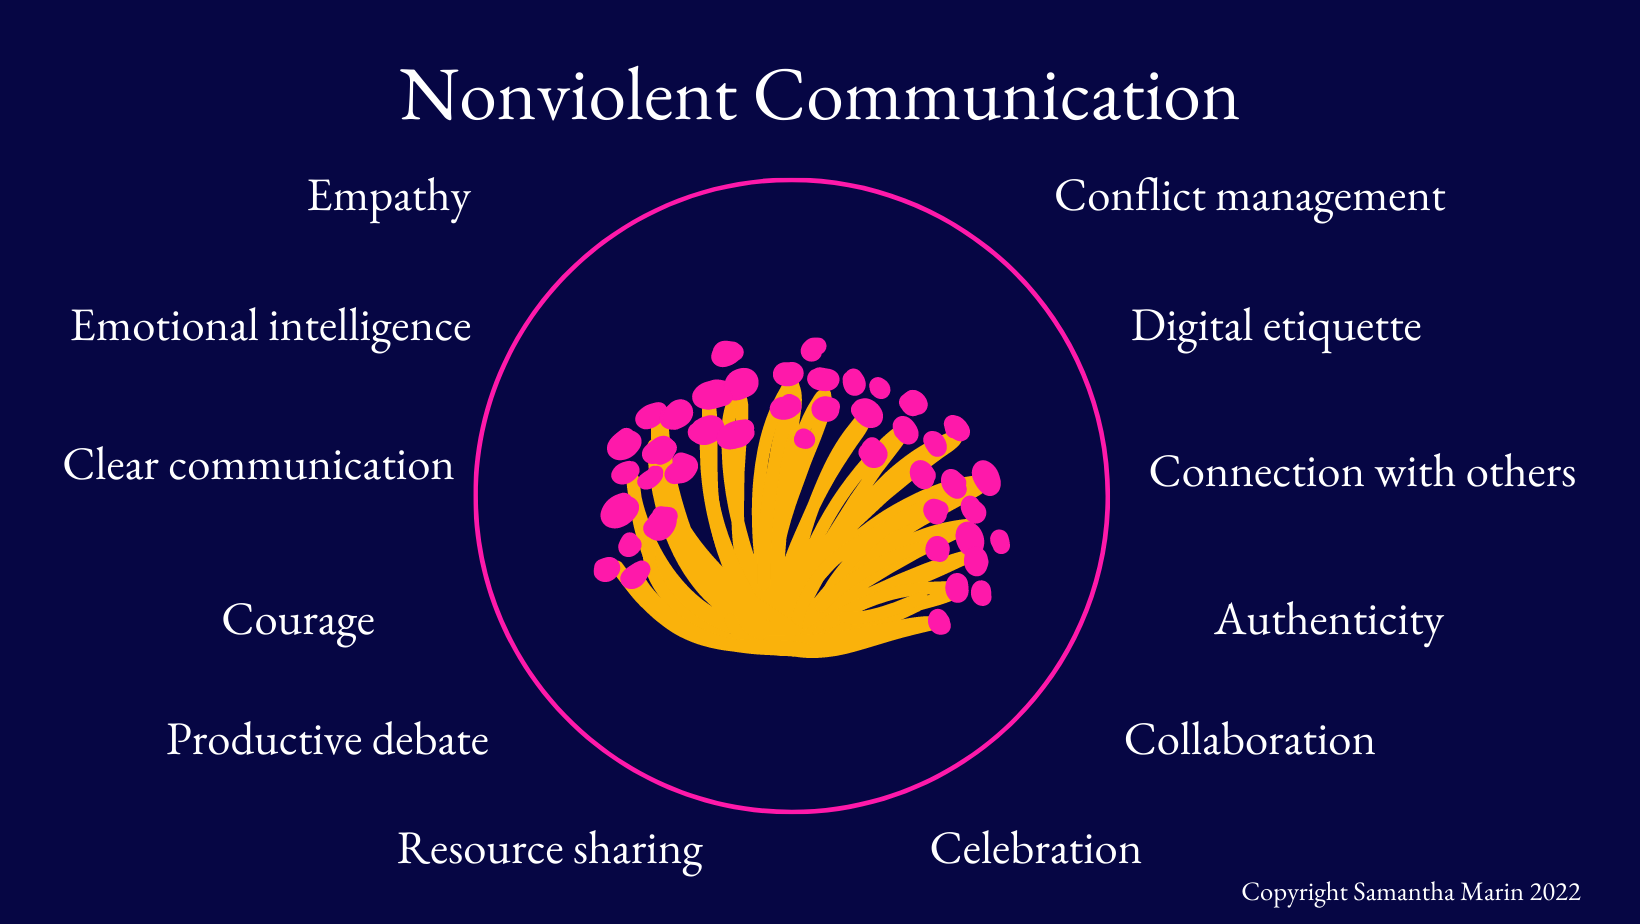 Nonviolent communication is important for establishing strong relationships with your co-contributors and working through difficult times and disagreements.